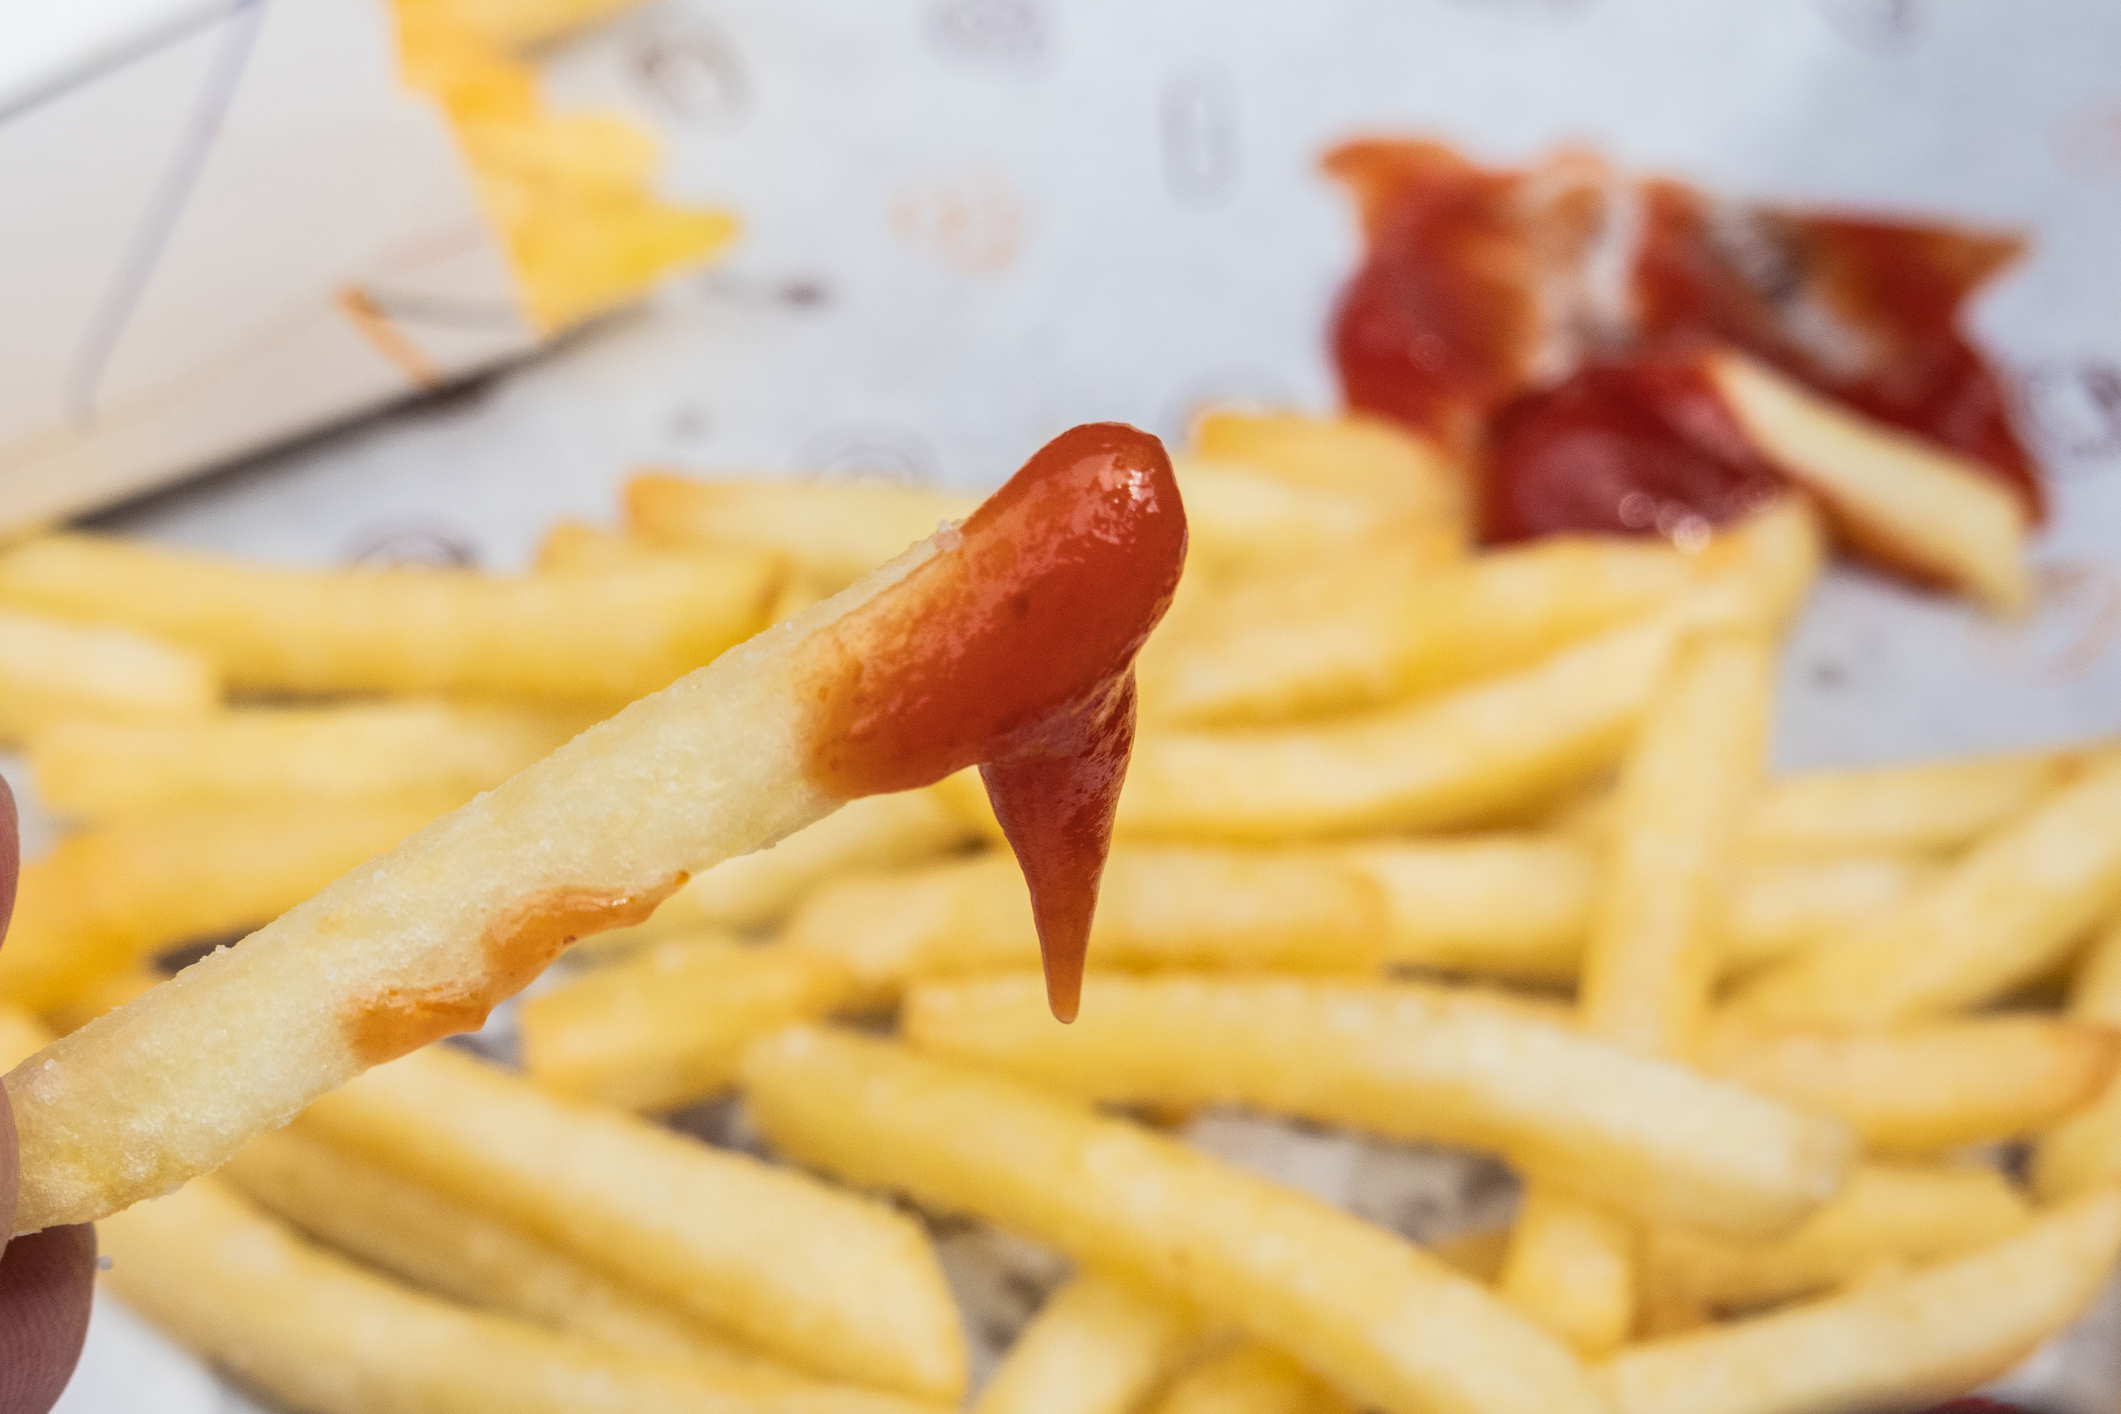 Close-up of a French fry dipped in ketchup, held in front of a pile of fries on a white paper